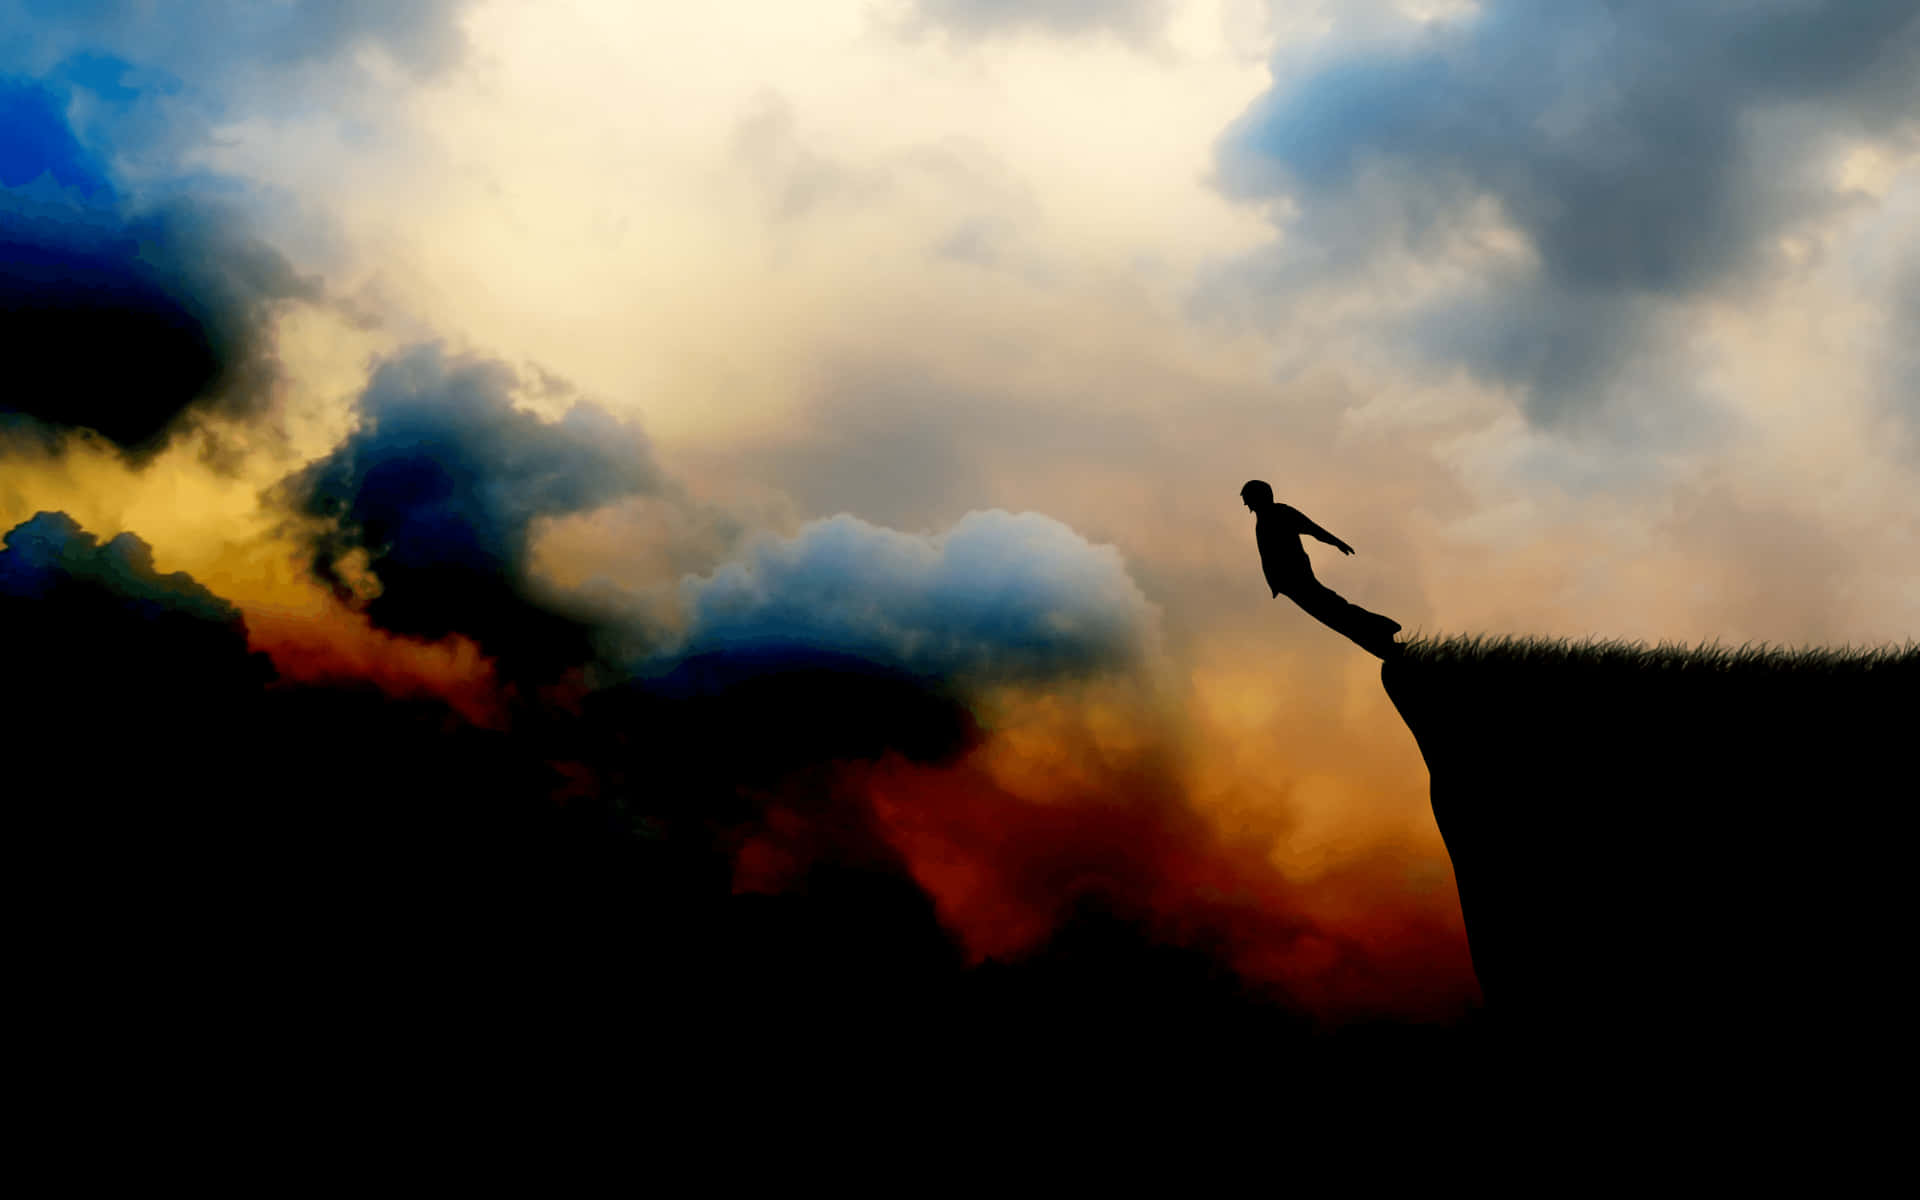 A Man Is Standing On A Cliff With Clouds In The Background